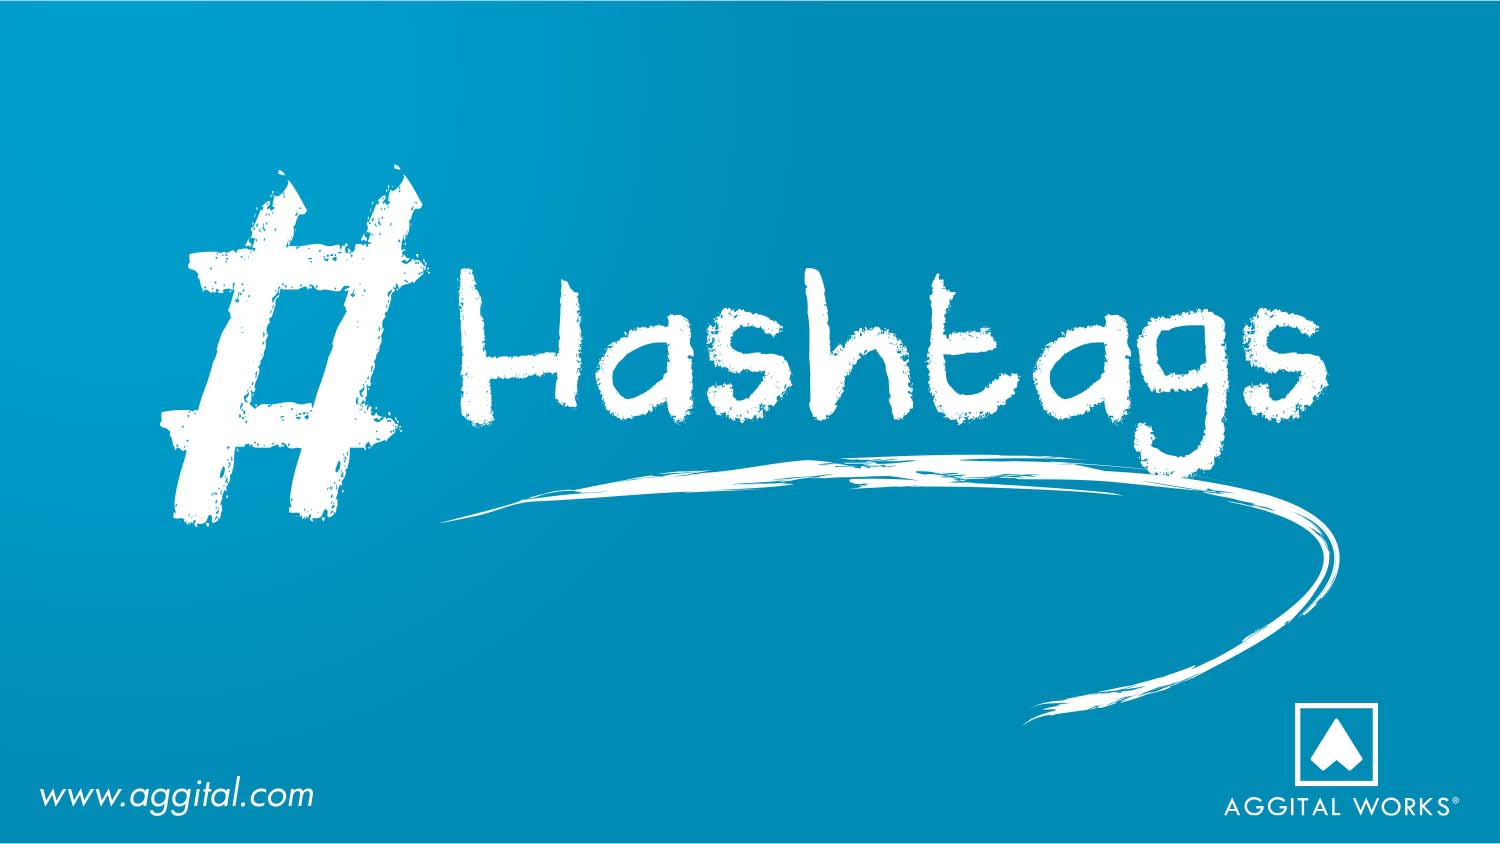 Using Instagram Hashtags for Growth